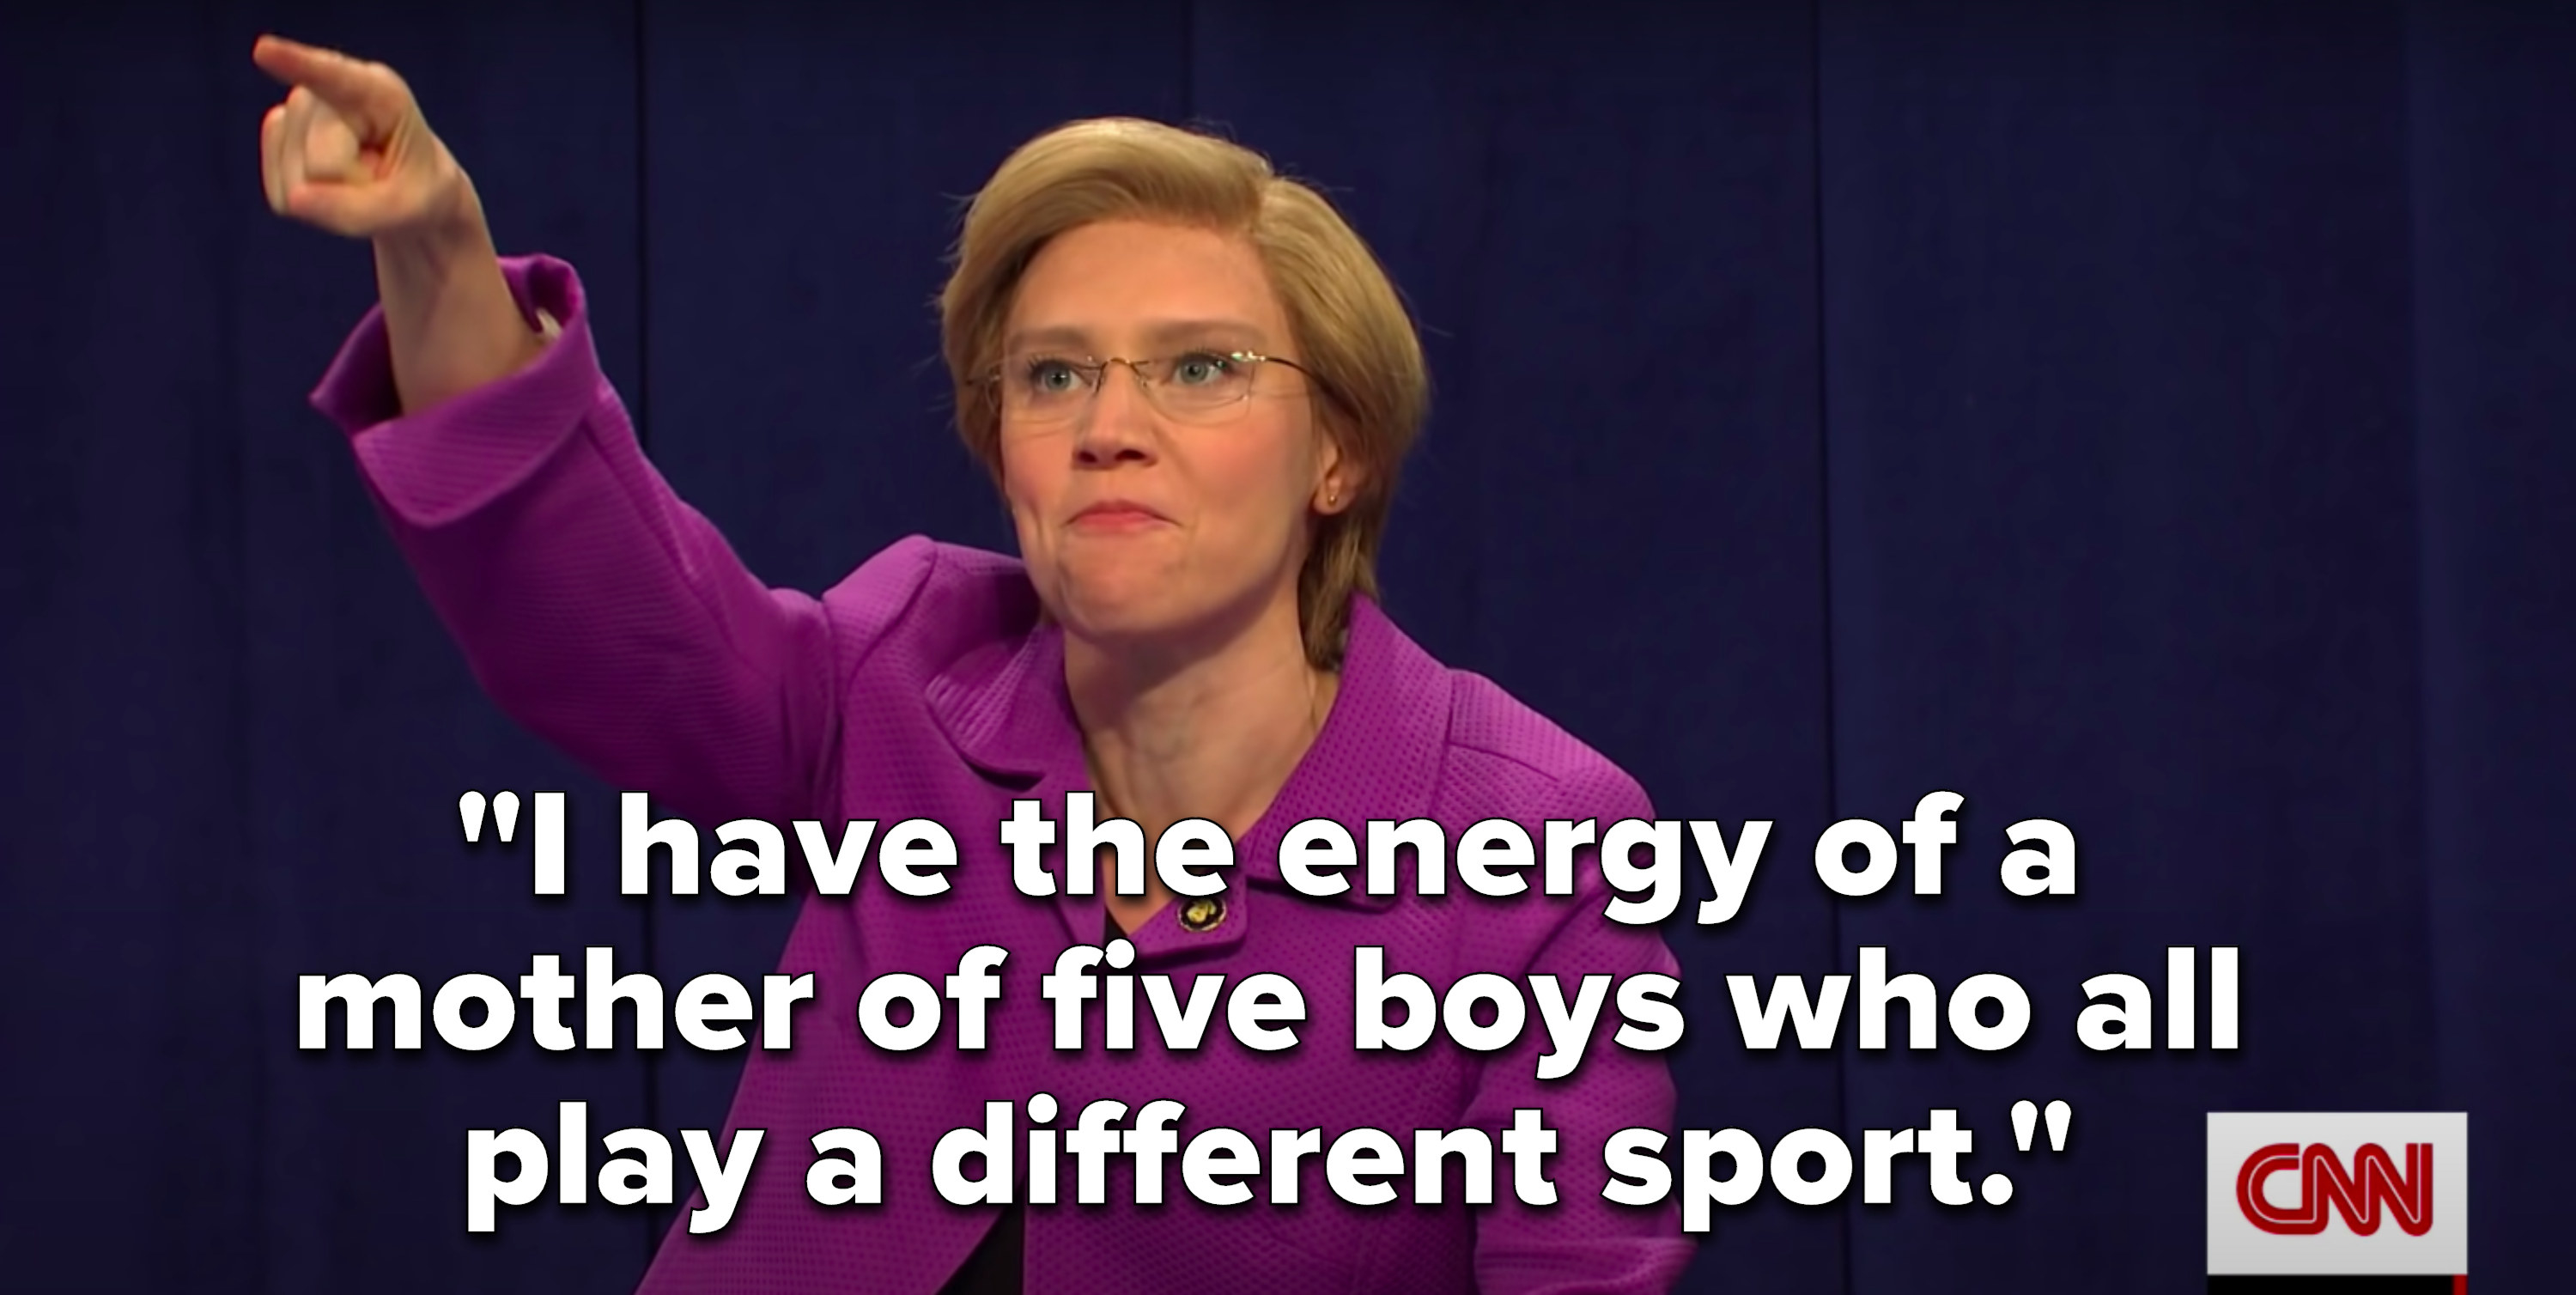 Kate McKinnon, as Elizabeth Warren, says, &quot;I have the energy of a mother of five boys who all play a different sport&quot;